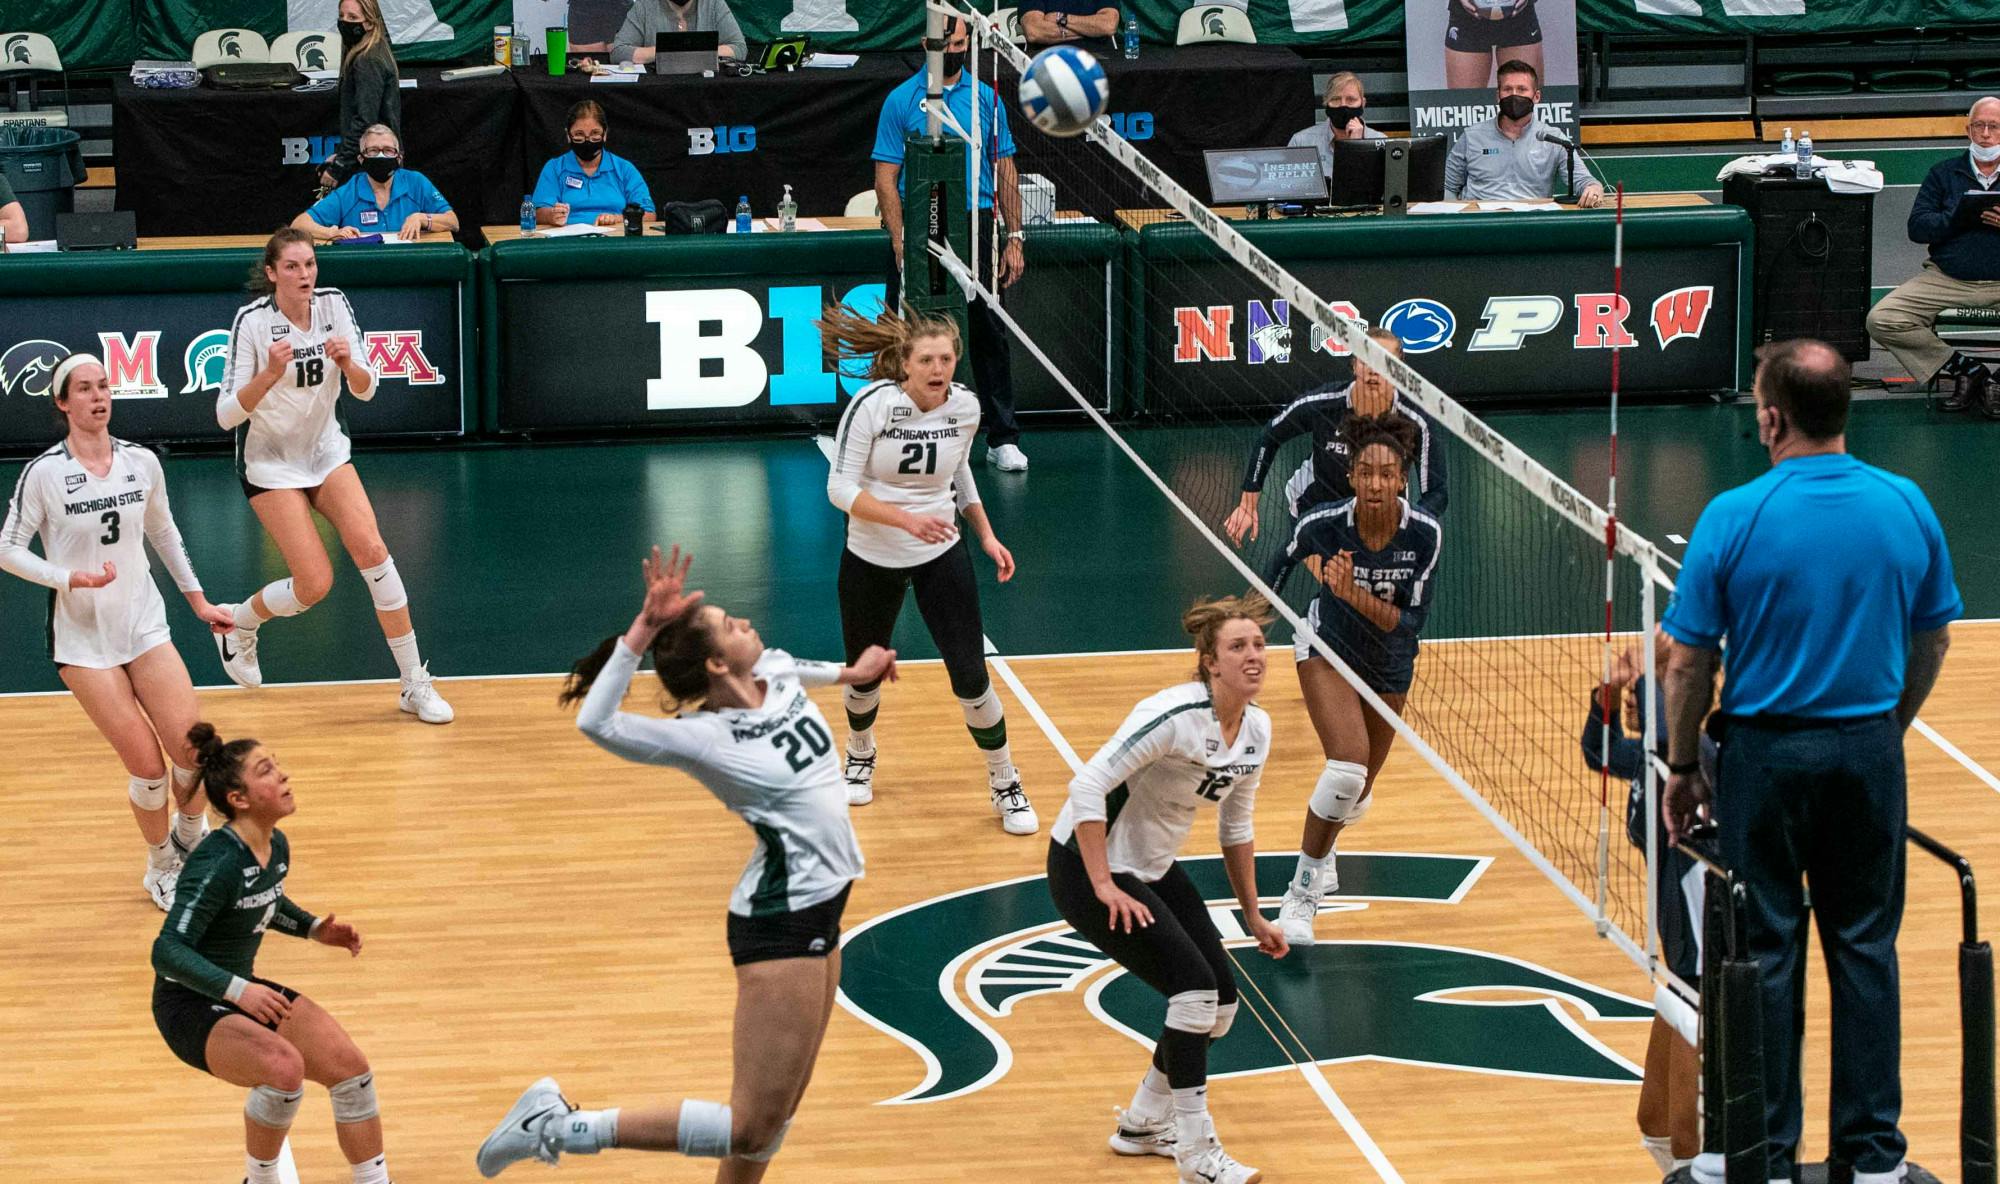 <p>Sophomore outside hitter Cecilee Max-Brown (20) jumps to kill the ball as the rest of the stadium watches. The Nittany Lions shut out the Spartans, 3-0, on March 20, 2021. </p>